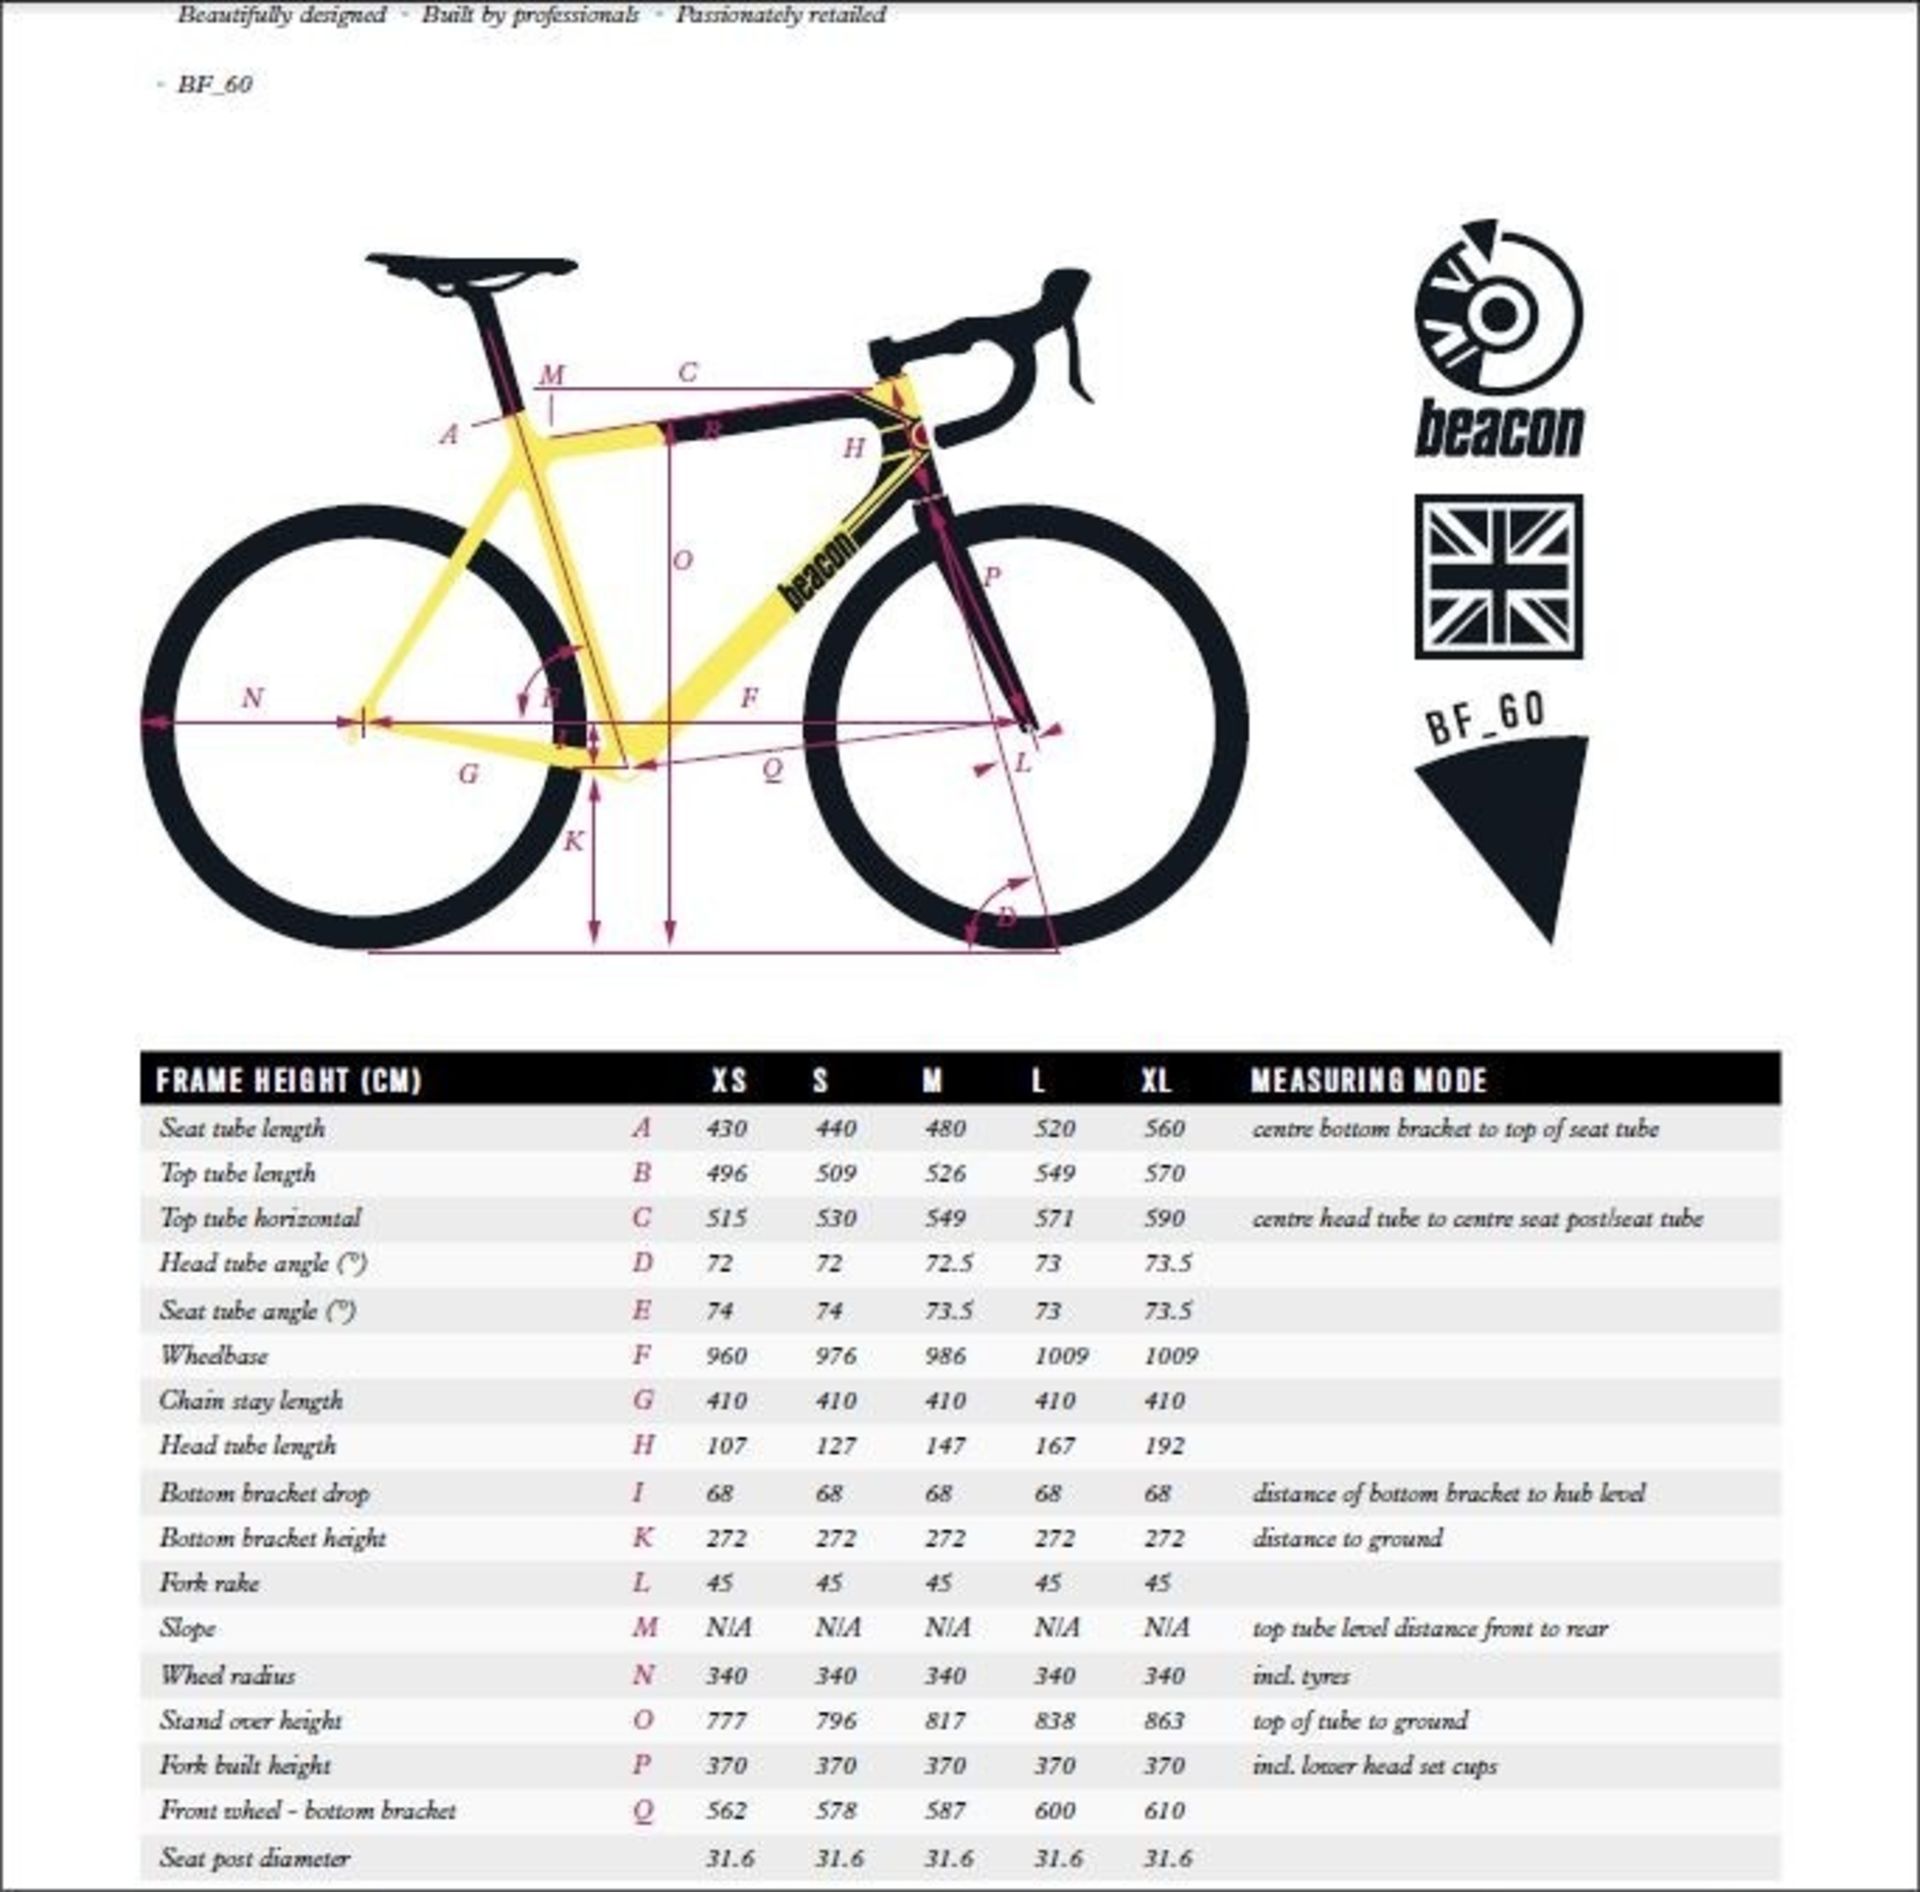 1 x Beacon Model BF-60, Size 440, Carbon Fibre Bike Frame in Yellow & Black. - Image 3 of 3